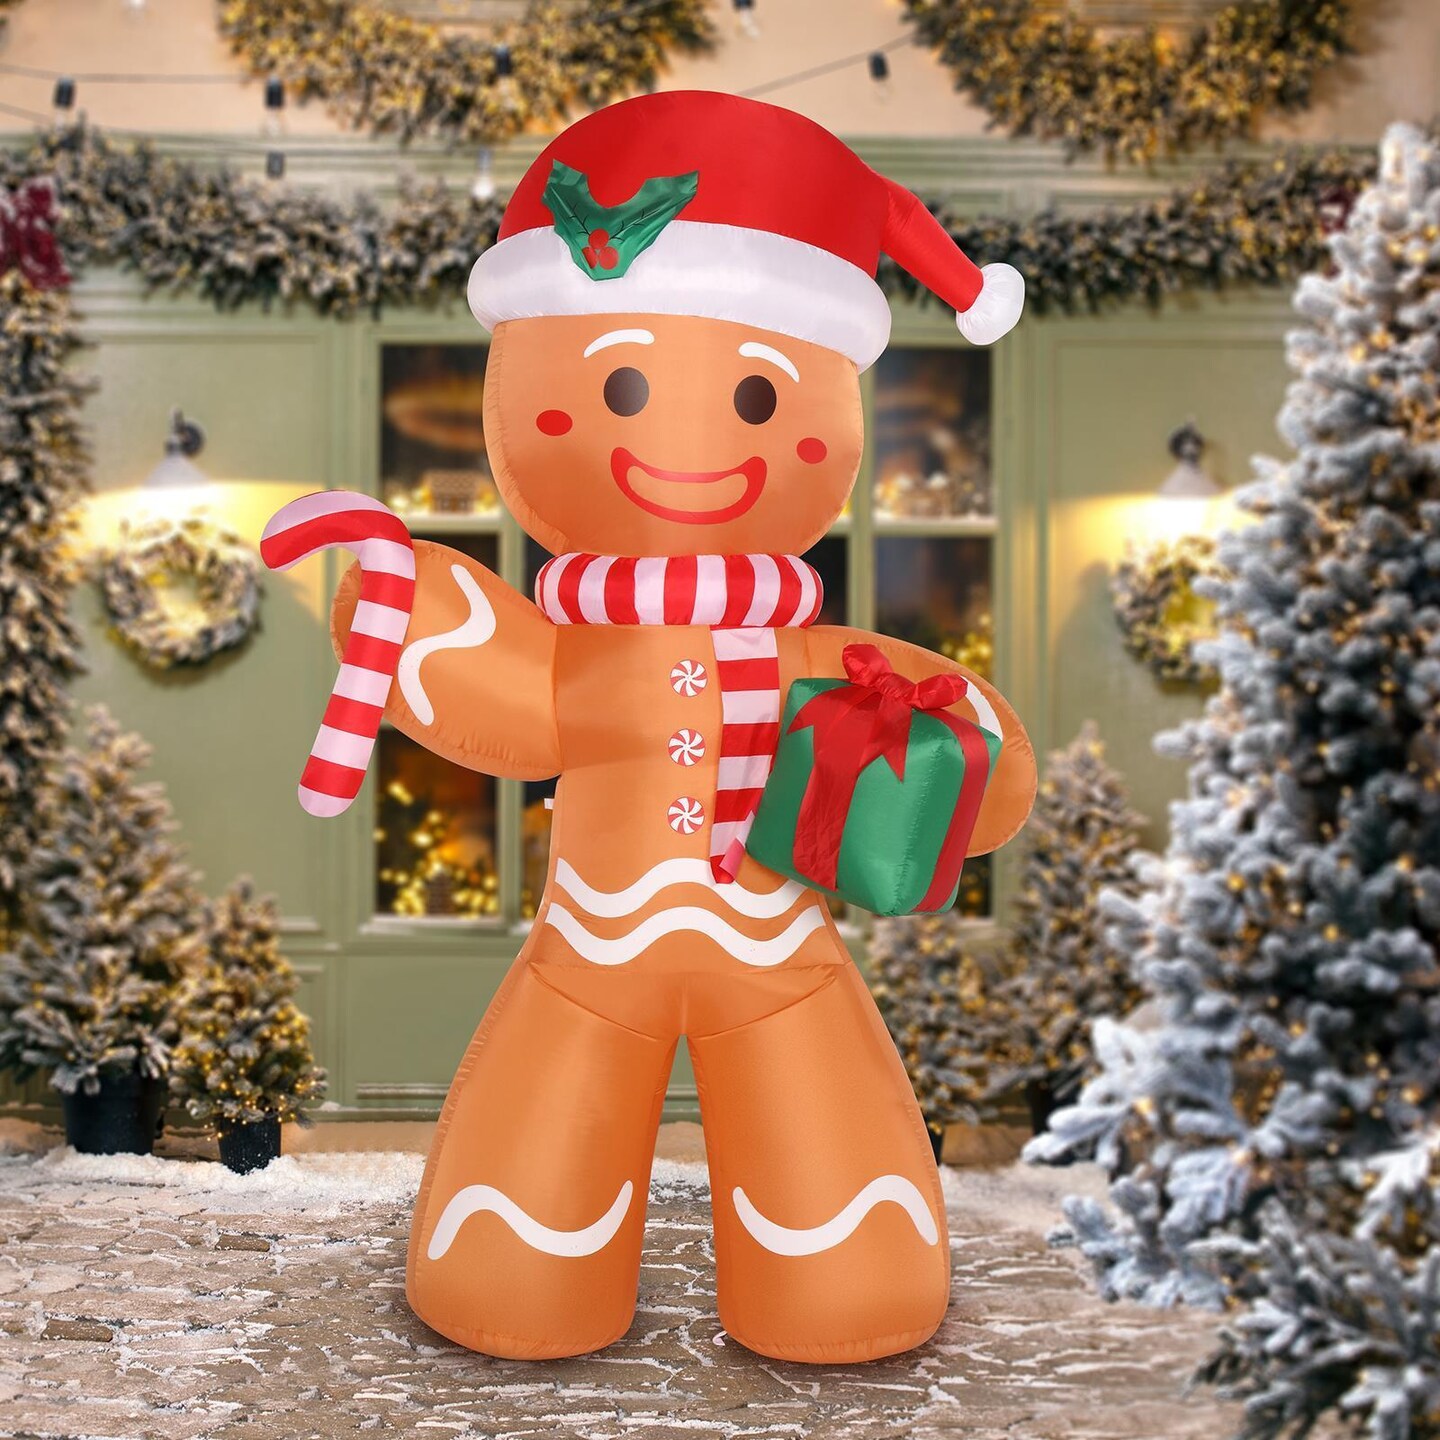 8FT Christmas Inflatables Gingerbread Man Yard Decor